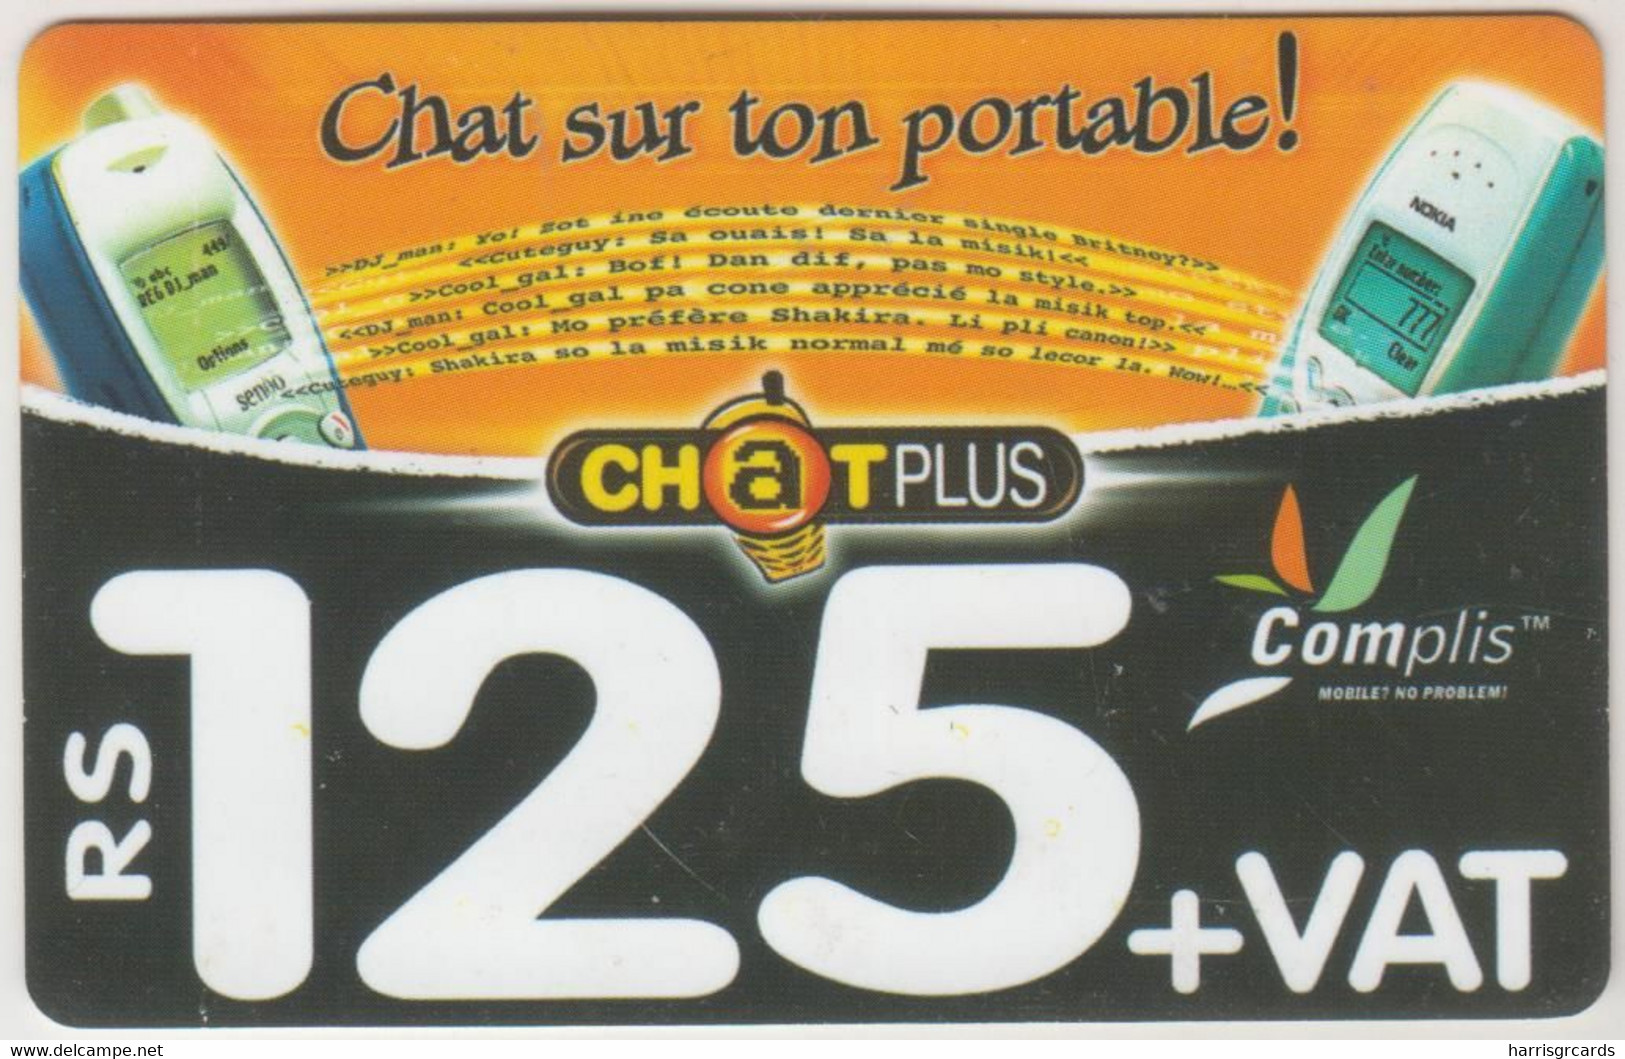 MAURITIUS ISLAND - Two Cellphones, Expiry Date:31/12/2005,Cellplus Complis Recharge, 125 Rs, Used - Mauritius